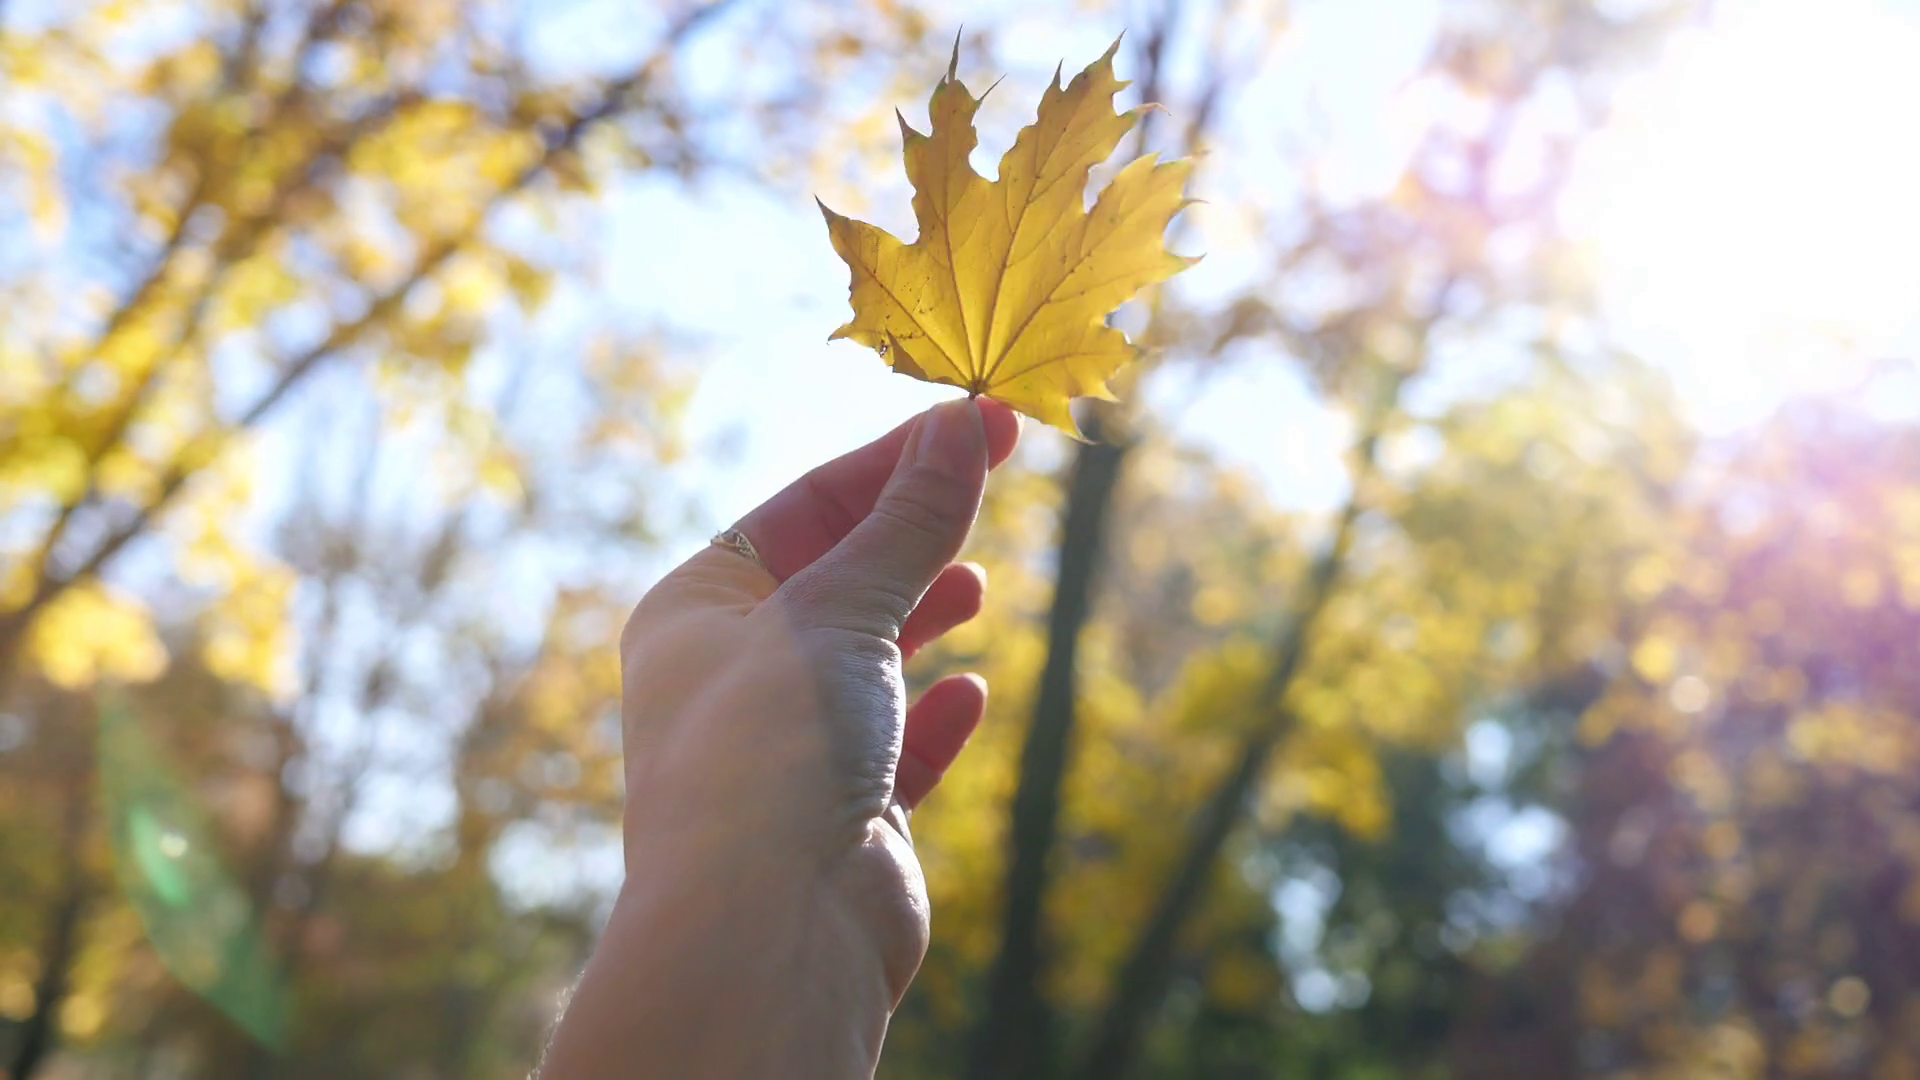 A girl holding with fingers a yellow autumn leaf walking in a park ...